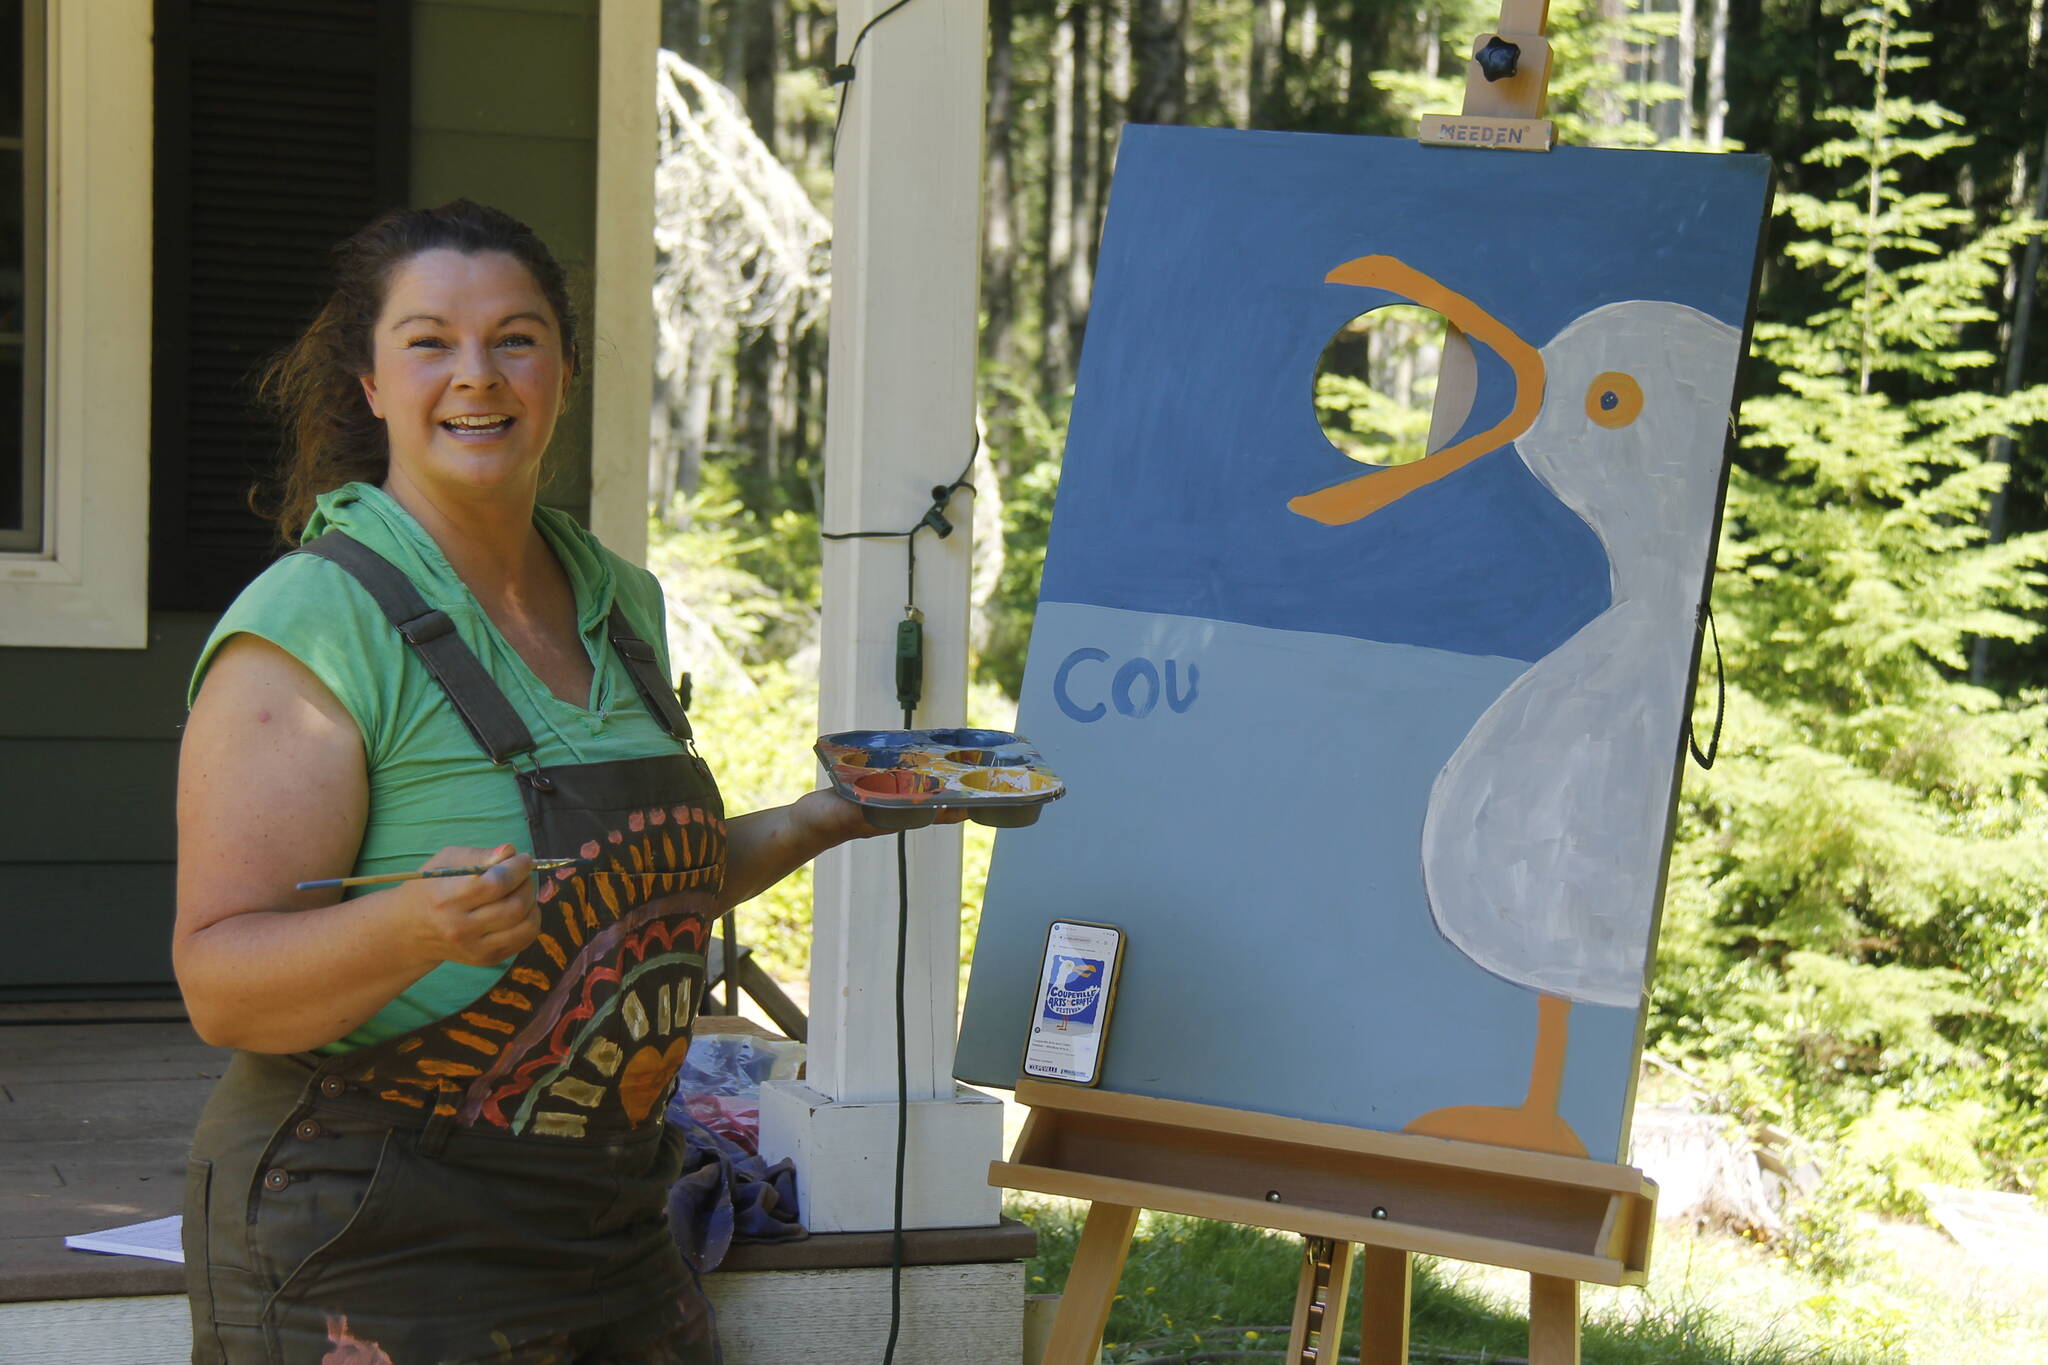 Rachel Phillips paints a cornhole board for the Coupeville Arts and Crafts Festival. (Photo by Kira Erickson/South Whidbey Record)